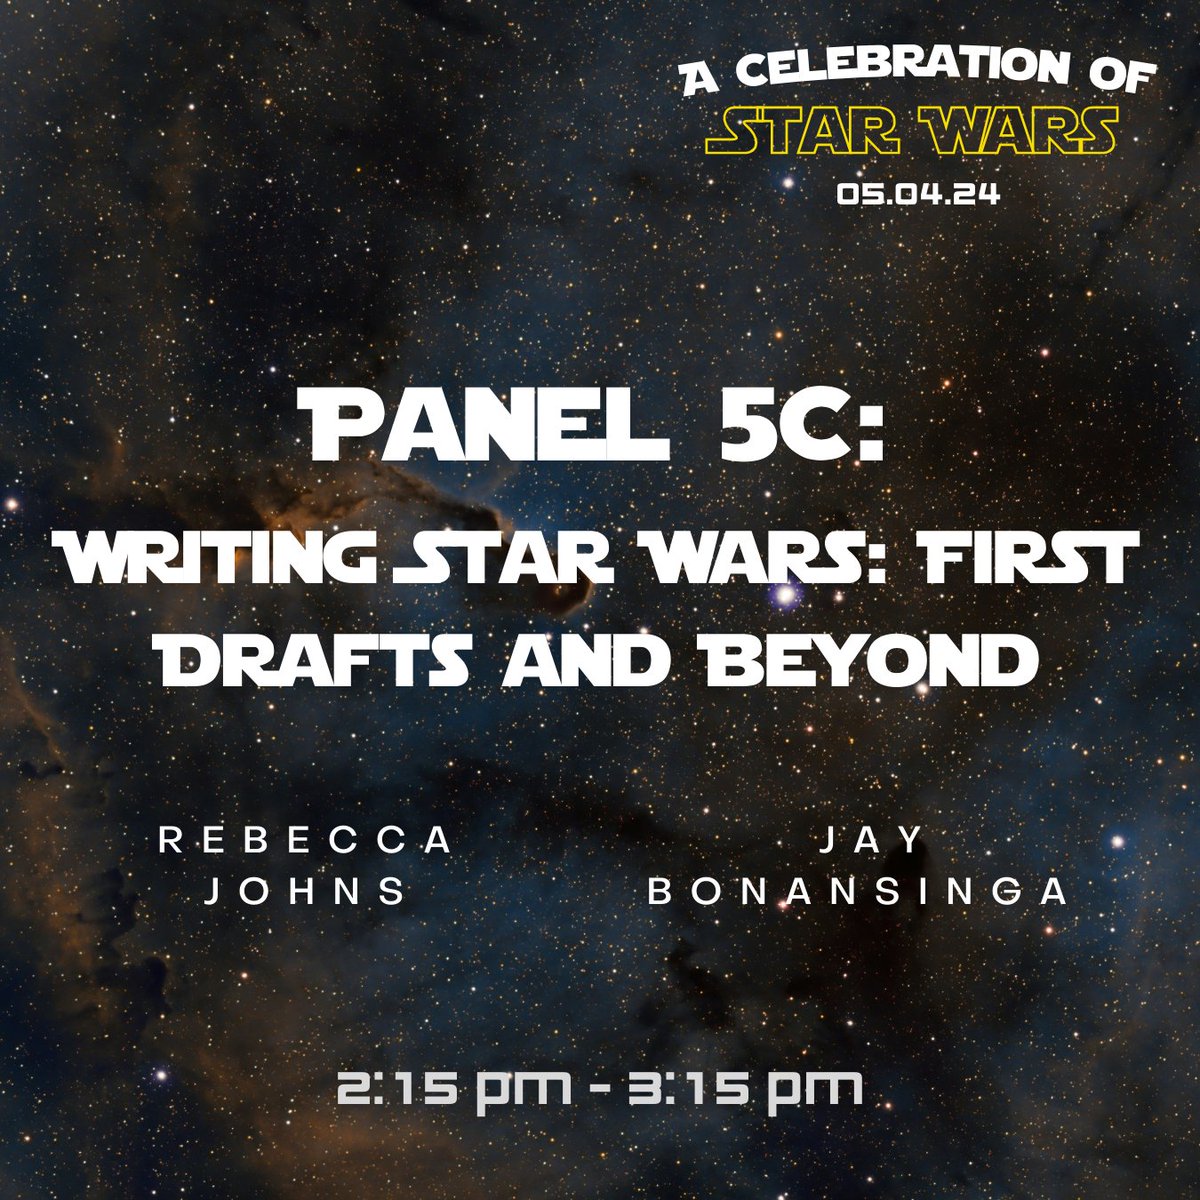 For Panel 5C we’ll be welcoming two DePaul Professors–Rebecca Johns and Jay Bonansinga to speak on “Writing Star Wars: First Drafts and Beyond!” Their panel will be taking place in Room 804 from 2:15 pm - 3:15 pm!